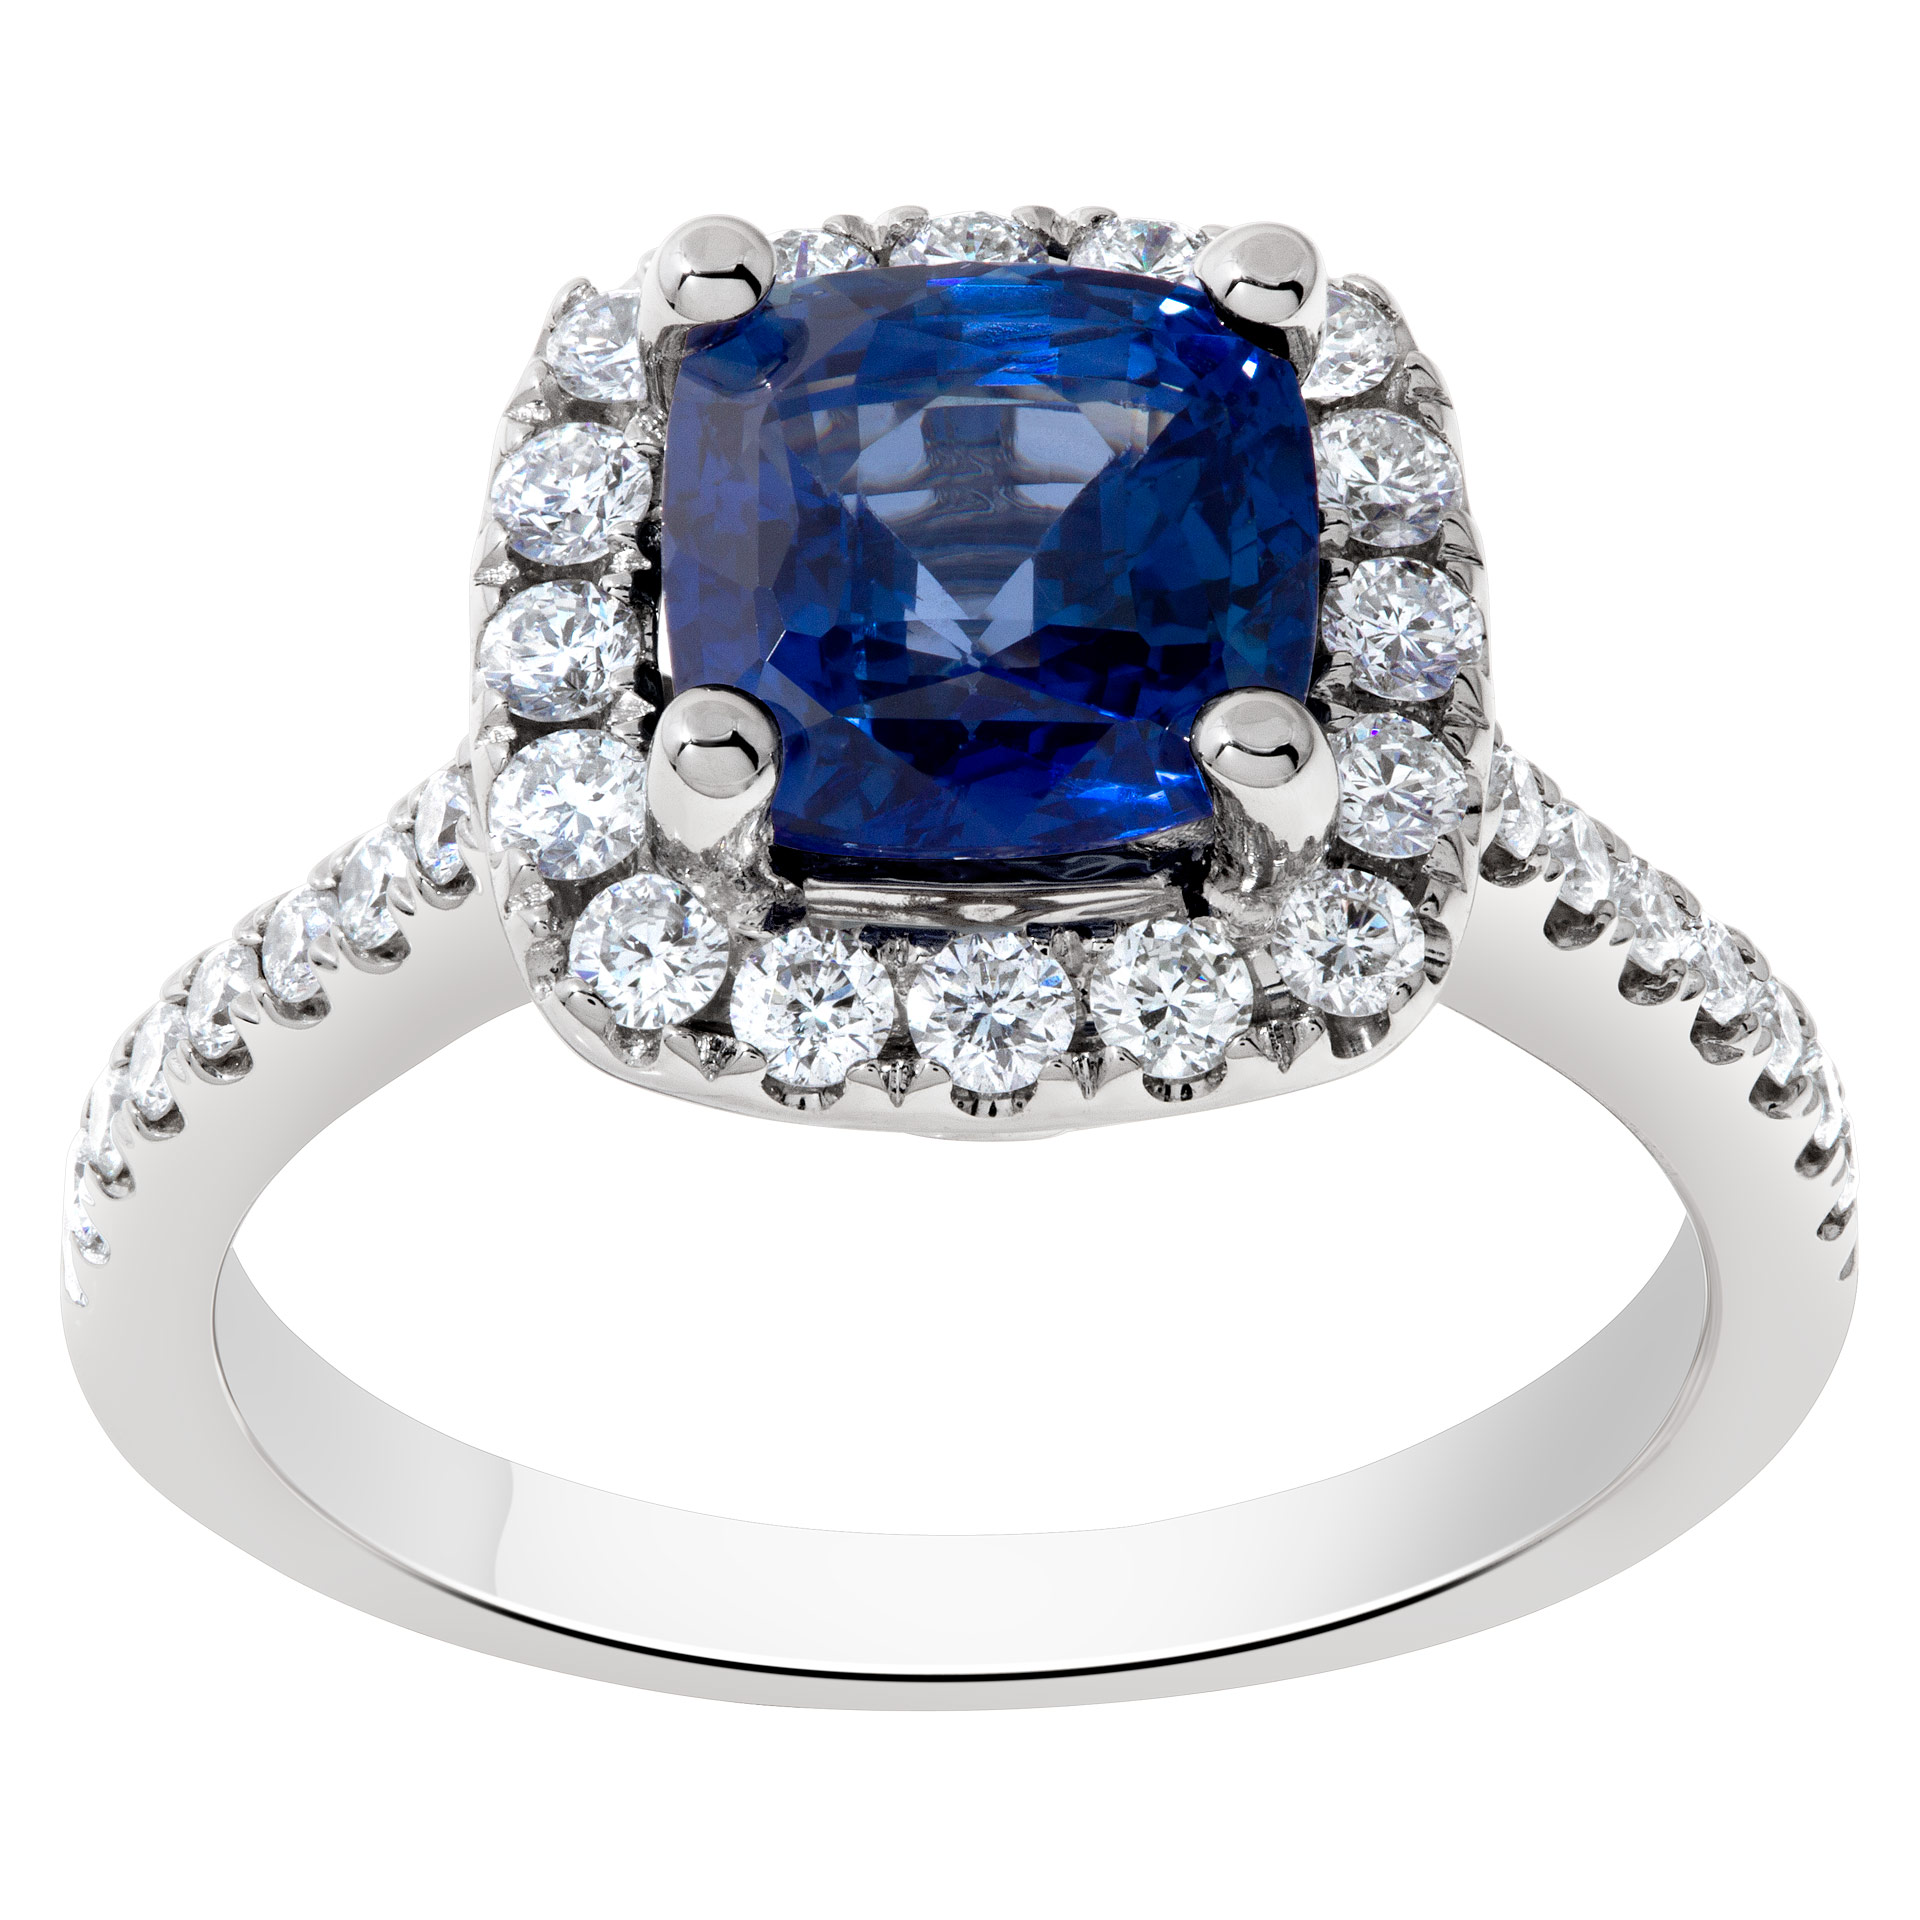 Diamond and cushion brilliant cut sapphire ring in 18k white gold.